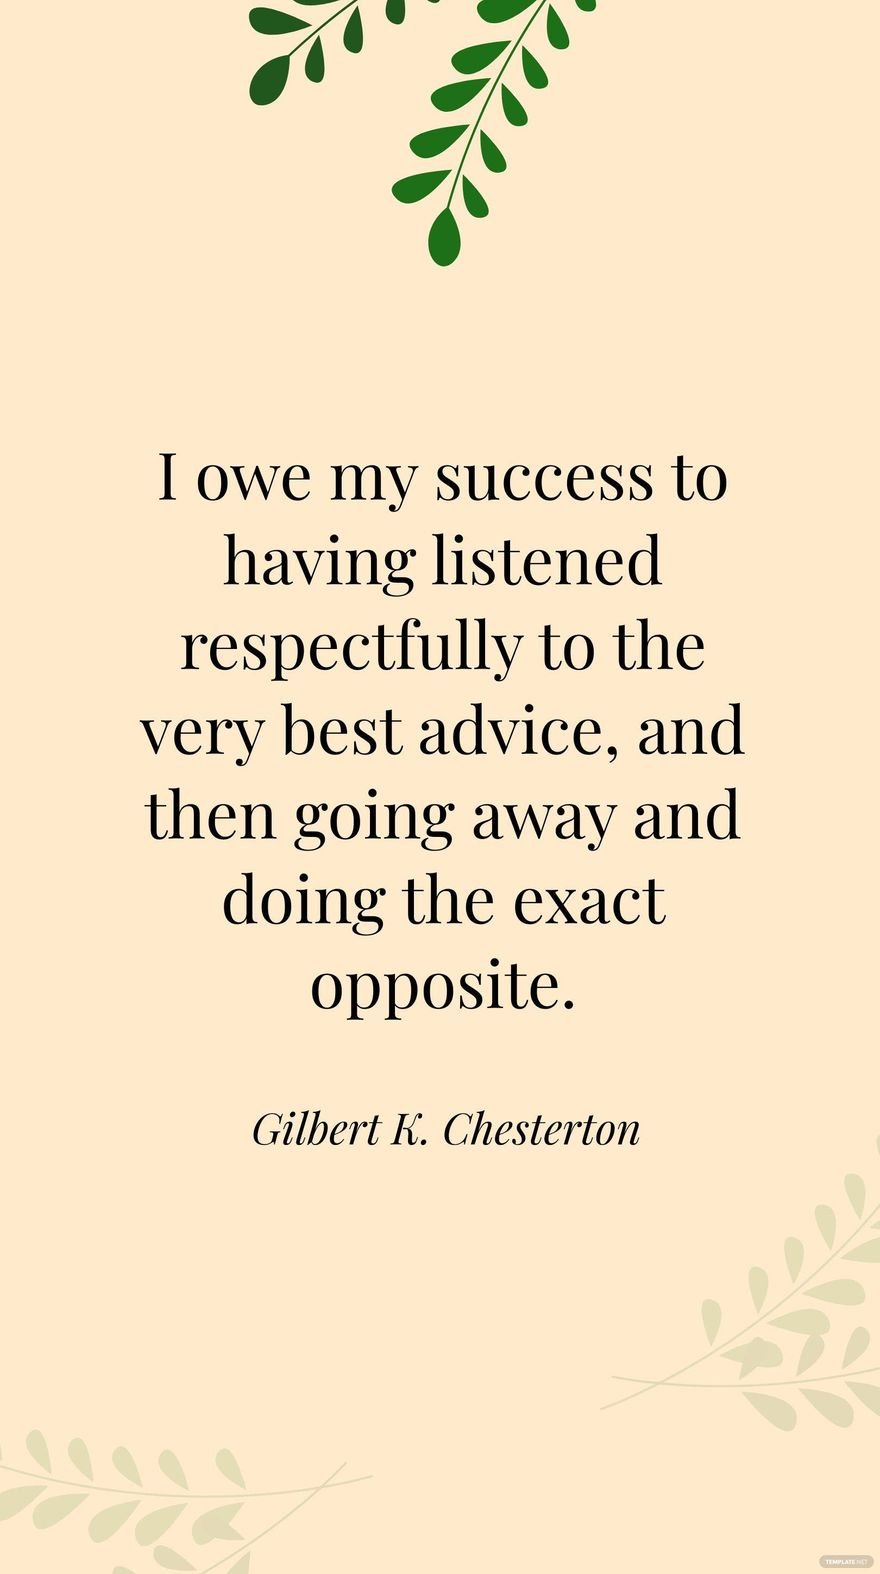 Free Gilbert K. Chesterton- I owe my success to having listened respectfully to the very best advice, and then going away and doing the exact opposite. in JPG